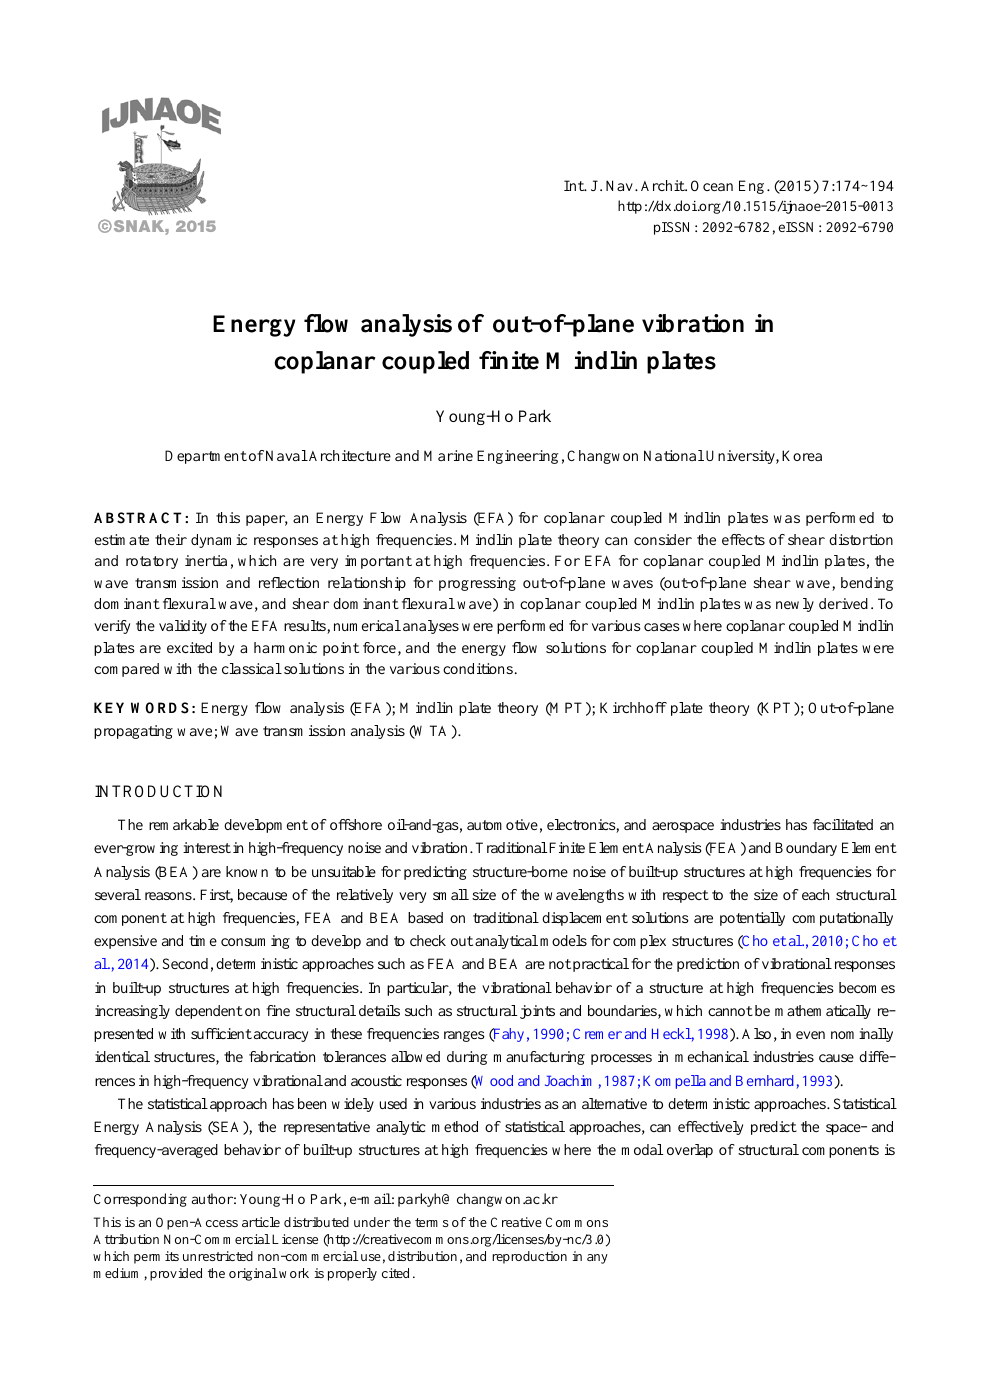 Energy Flow Analysis Of Out Of Plane Vibration In Coplanar Coupled Finite Mindlin Plates Topic Of Research Paper In Materials Engineering Download Scholarly Article Pdf And Read For Free On Cyberleninka Open Science